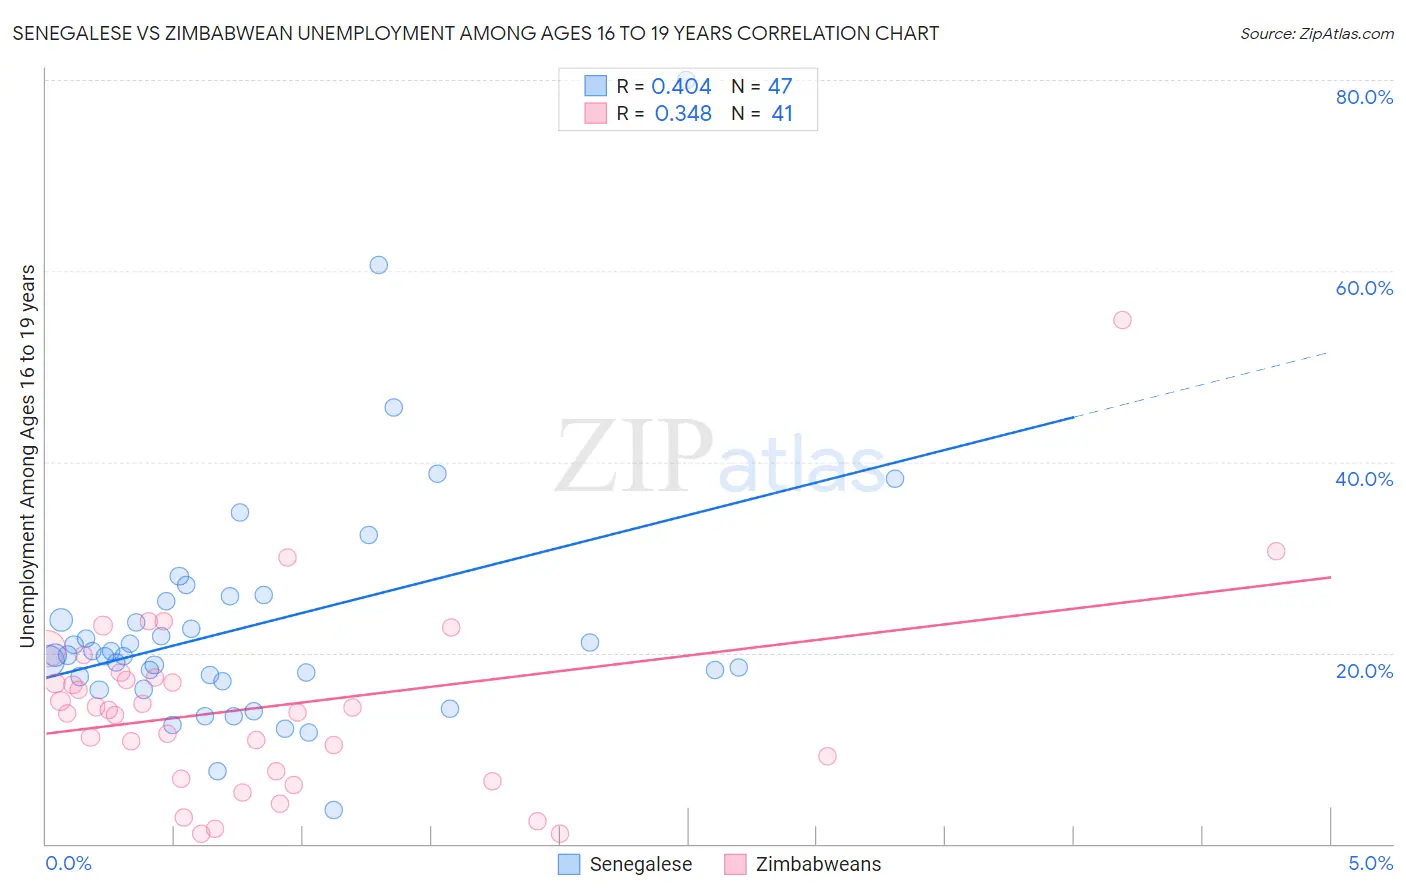 Senegalese vs Zimbabwean Unemployment Among Ages 16 to 19 years